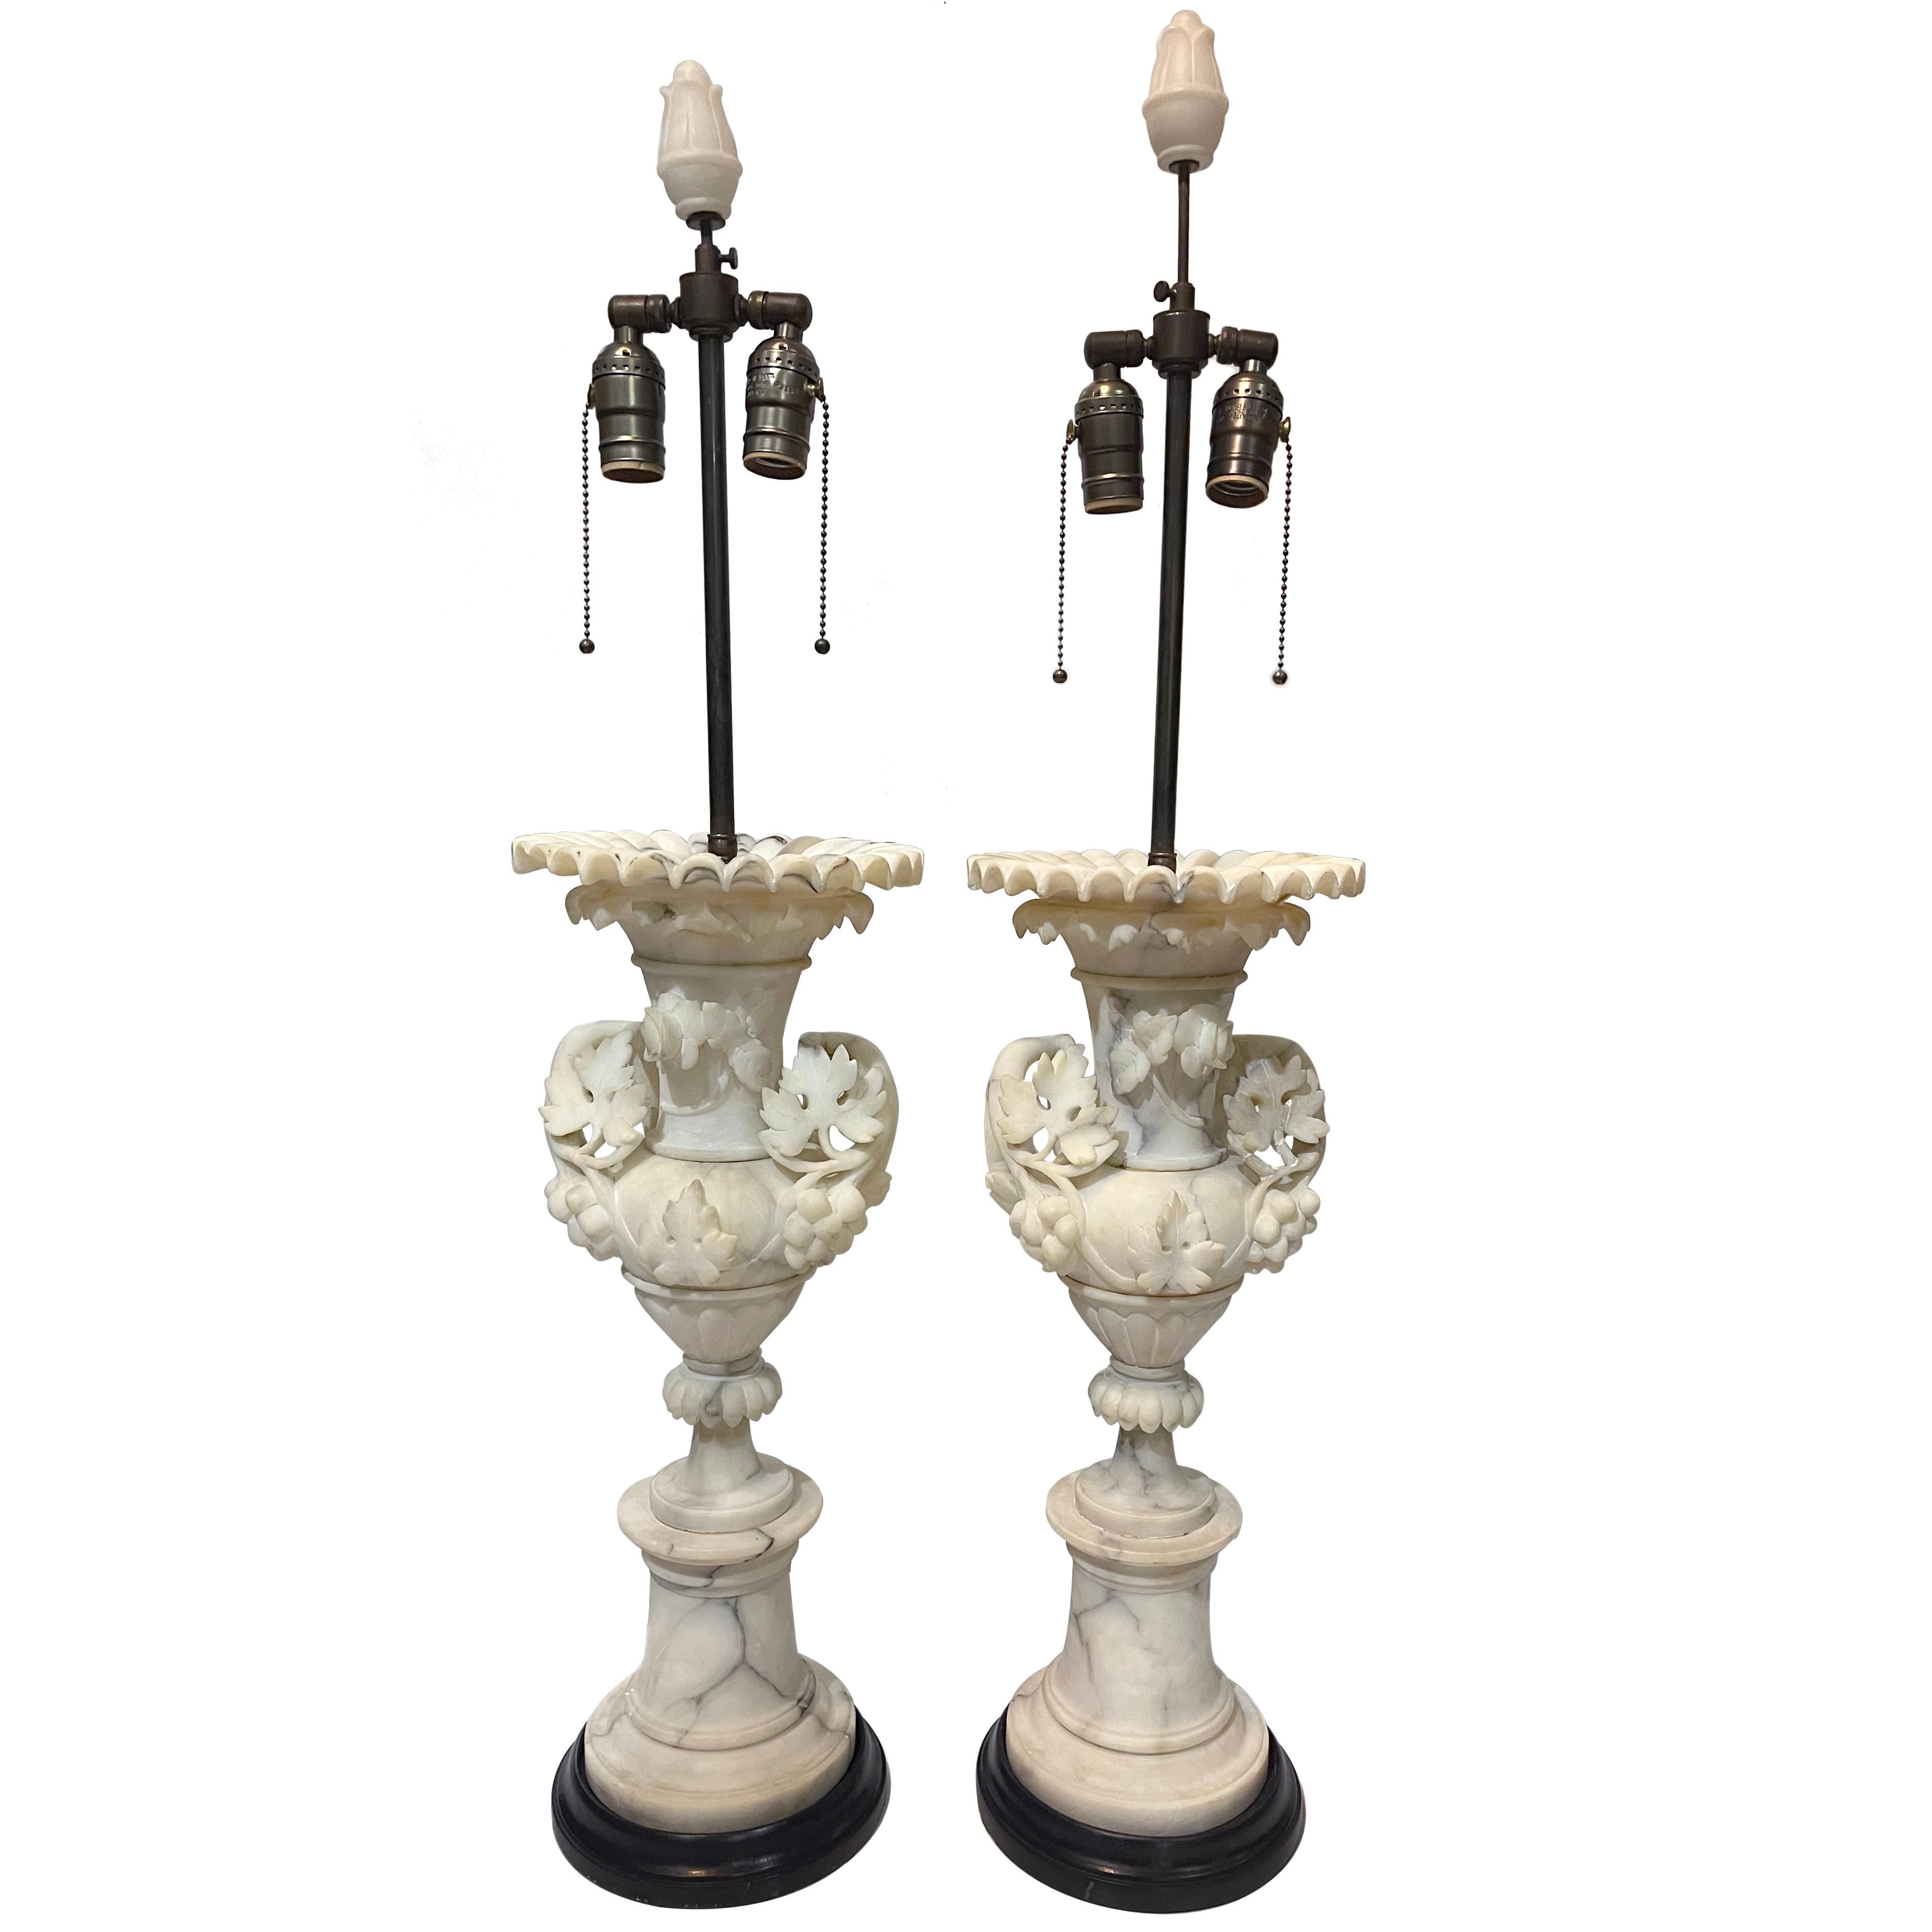 Pair of circa 1930s Italian carved alabaster lamps with elaborate foliage motif.

Measurements:
Height of body 21